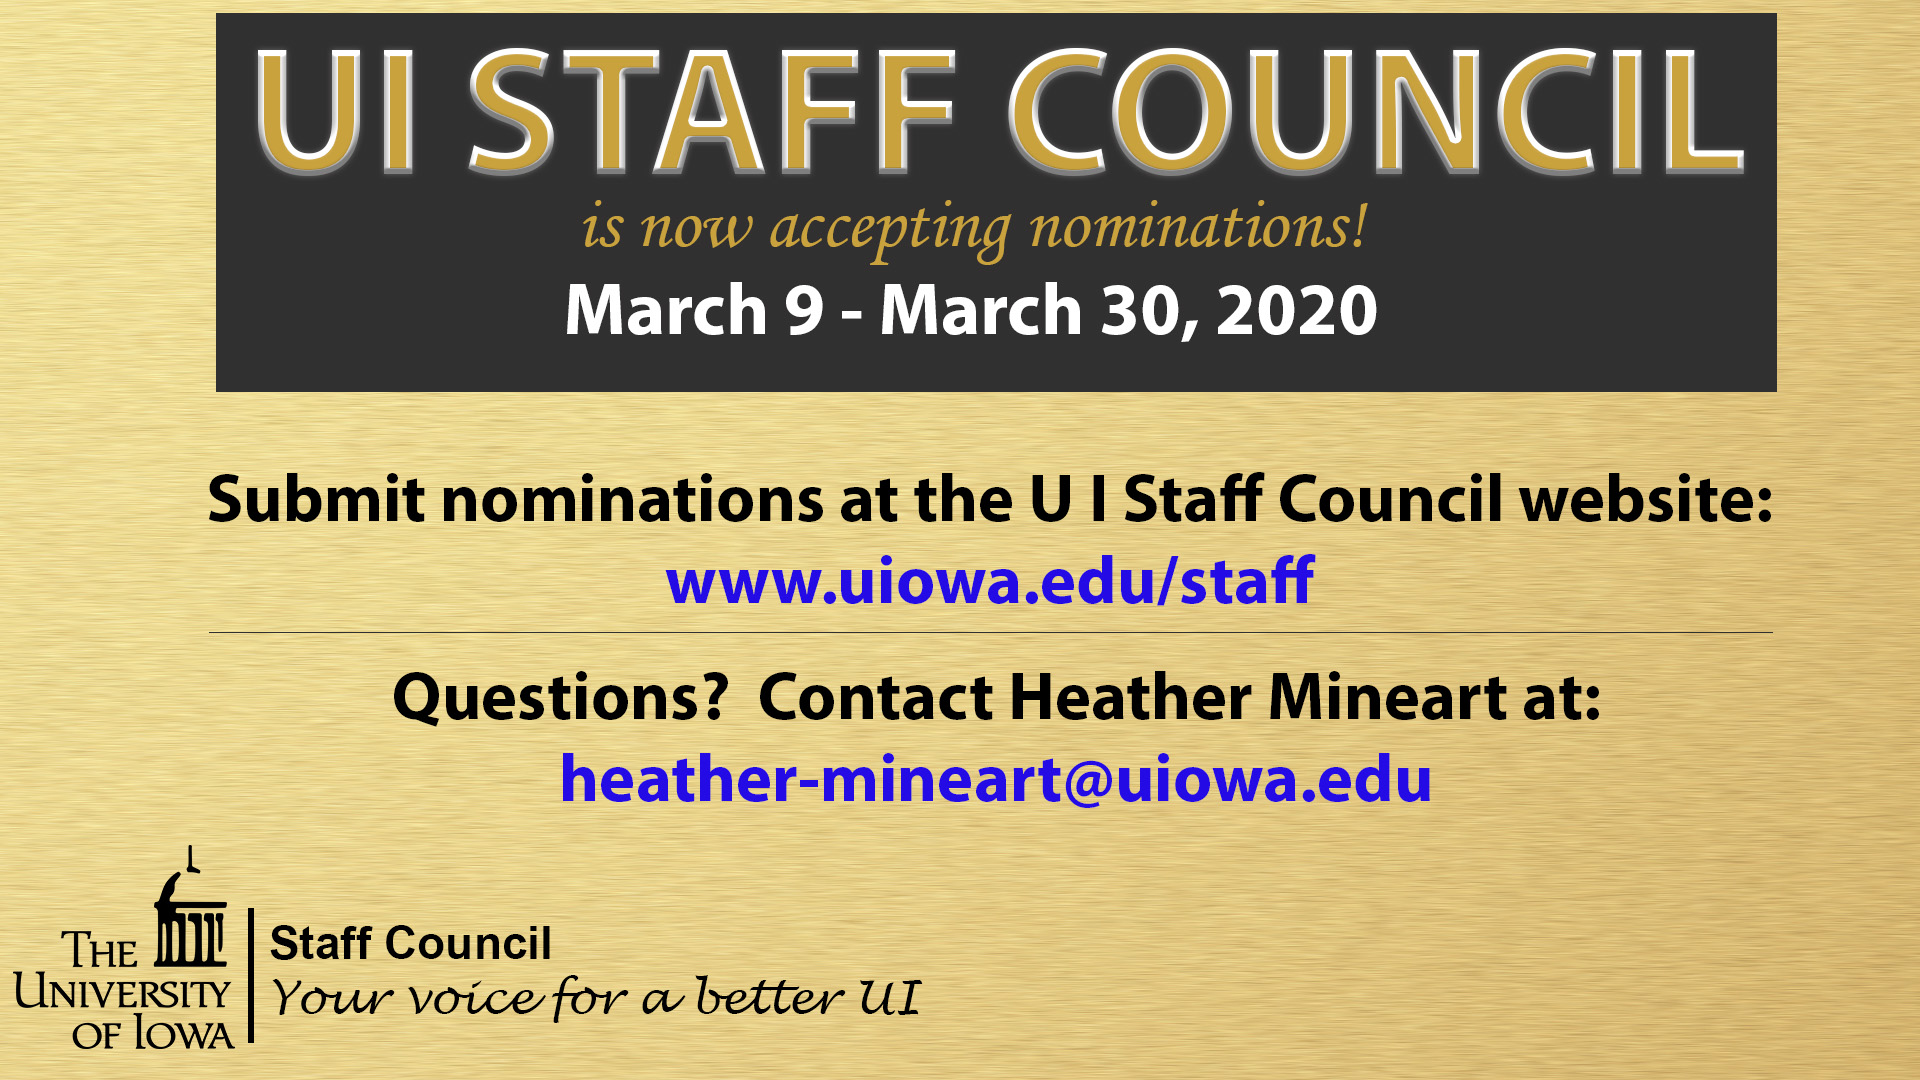 Submit nominators for UI staff council